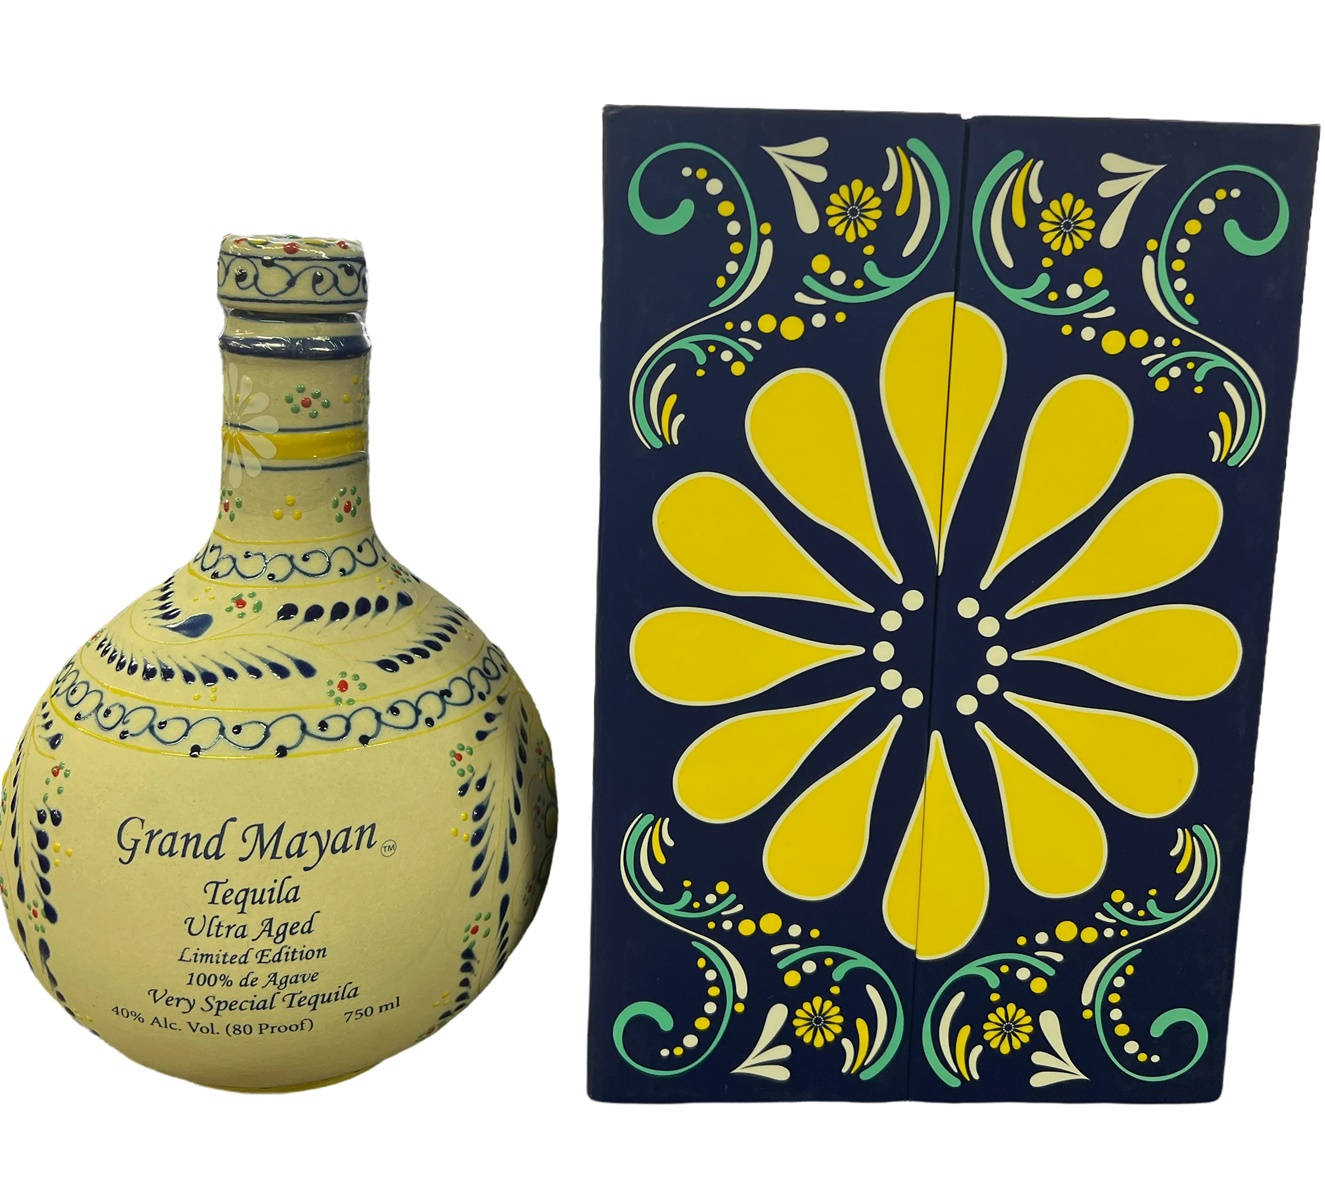 Grand Mayan Silver Tequila Ultra Aged Flower Box Picture